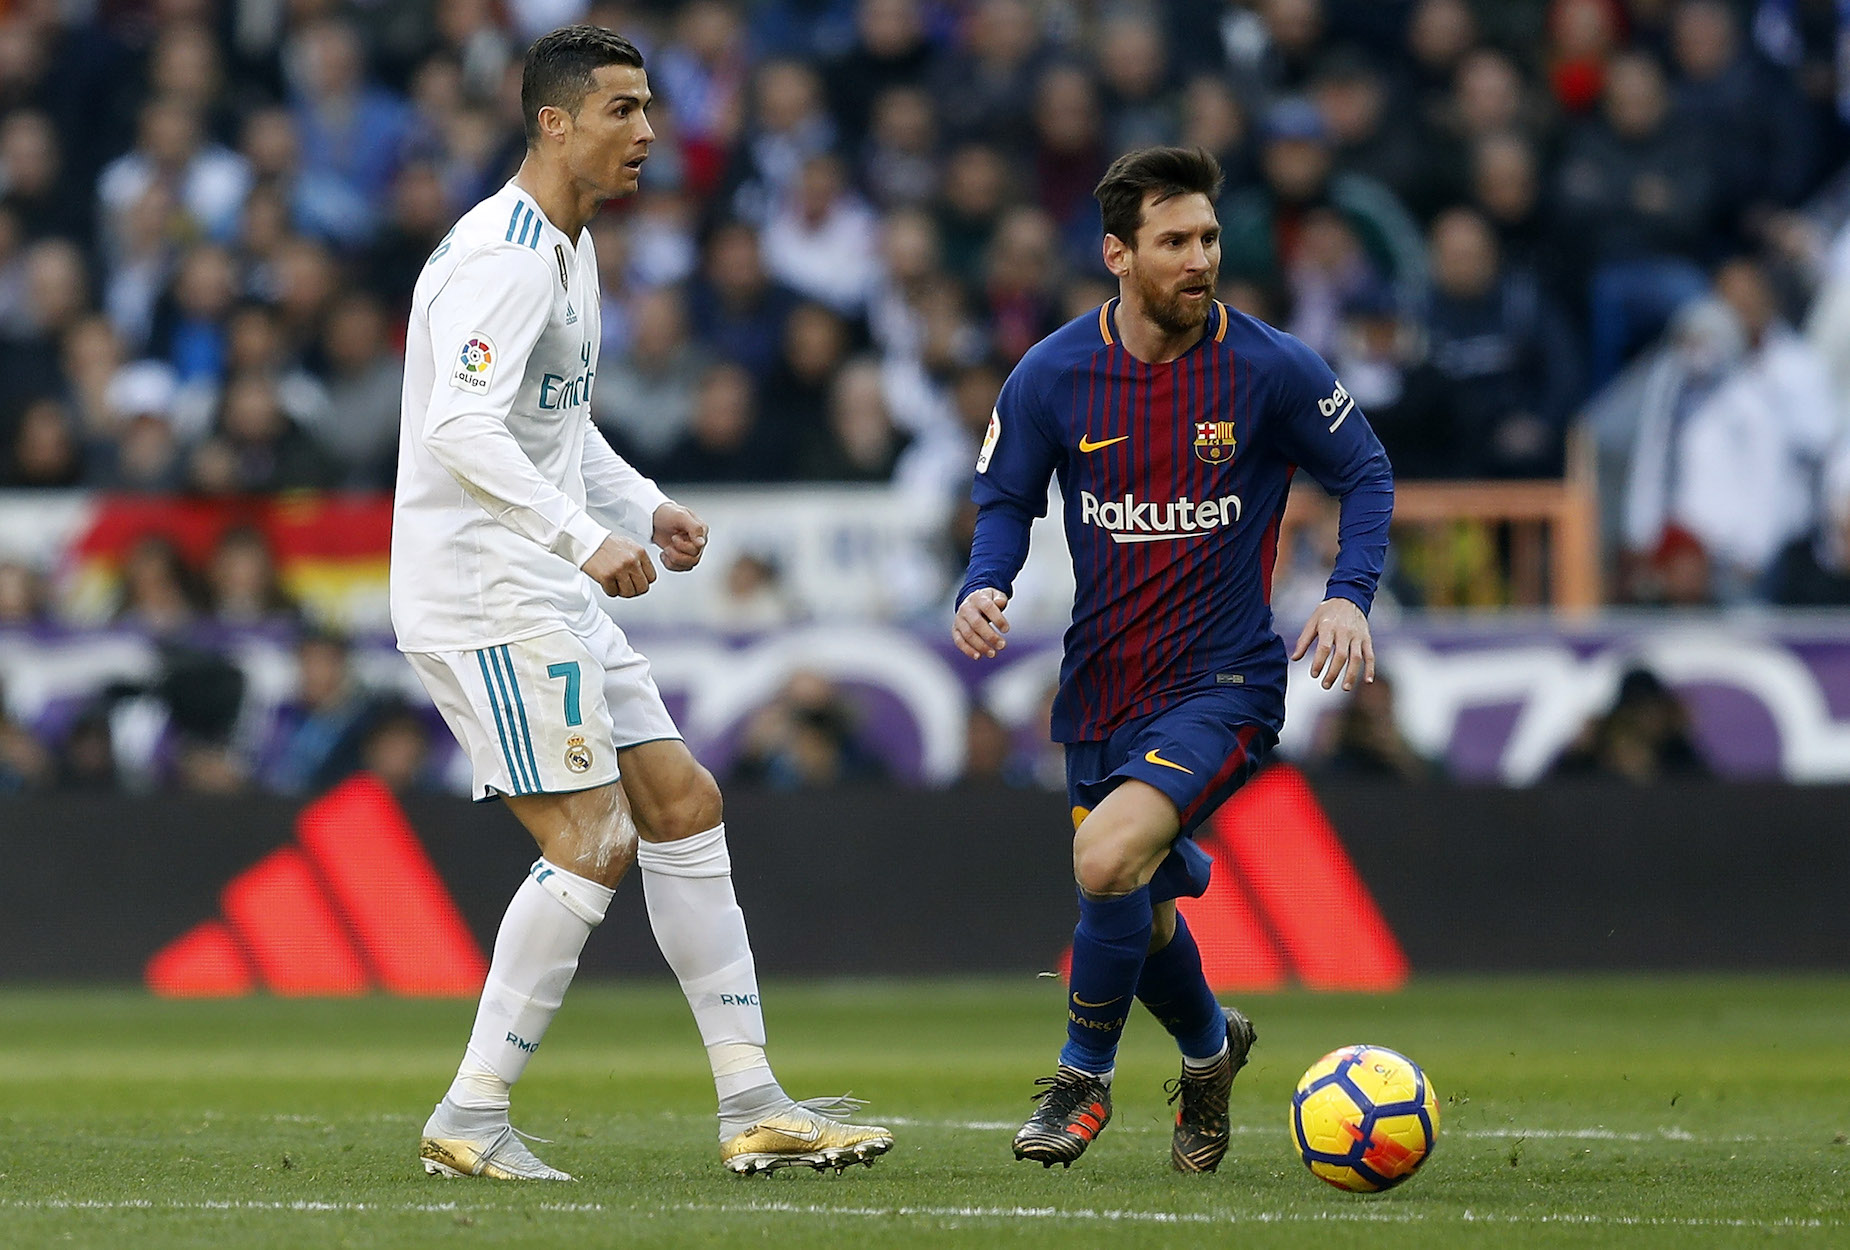 Lionel Messi scored a financial victory over his longtime rival Cristiano Ronaldo.